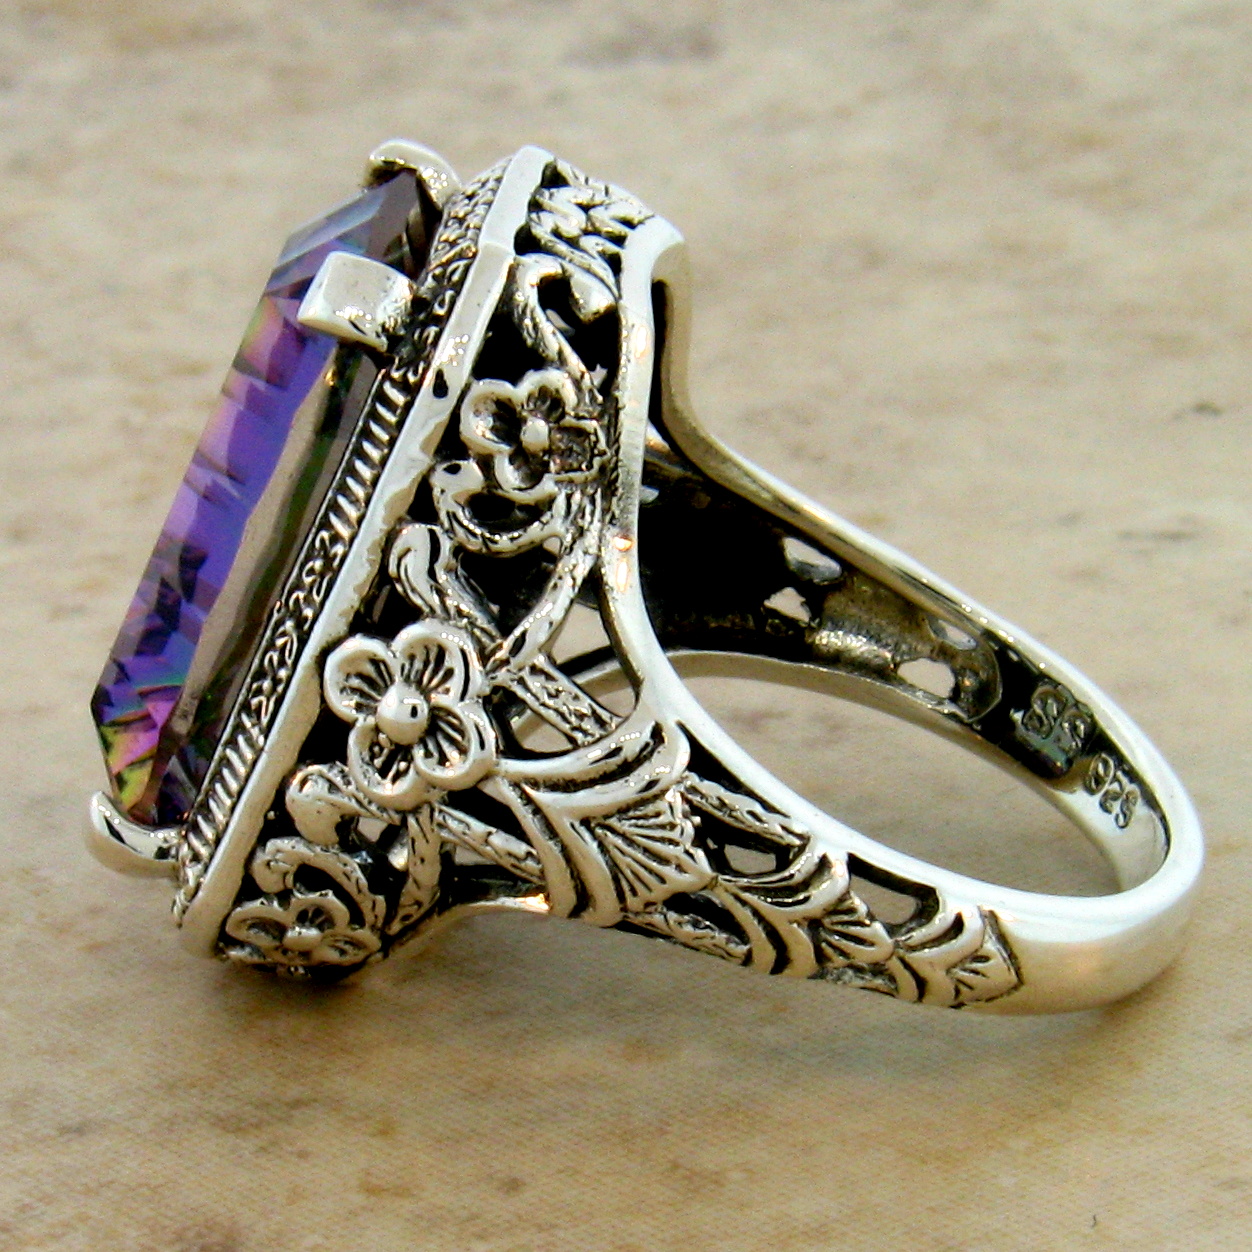 Download 7 CT MYSTIC QUARTZ ANTIQUE STYLE DECO 925 STERLING SILVER RING SIZE 6.75 #359 Fashion Jewelry ...